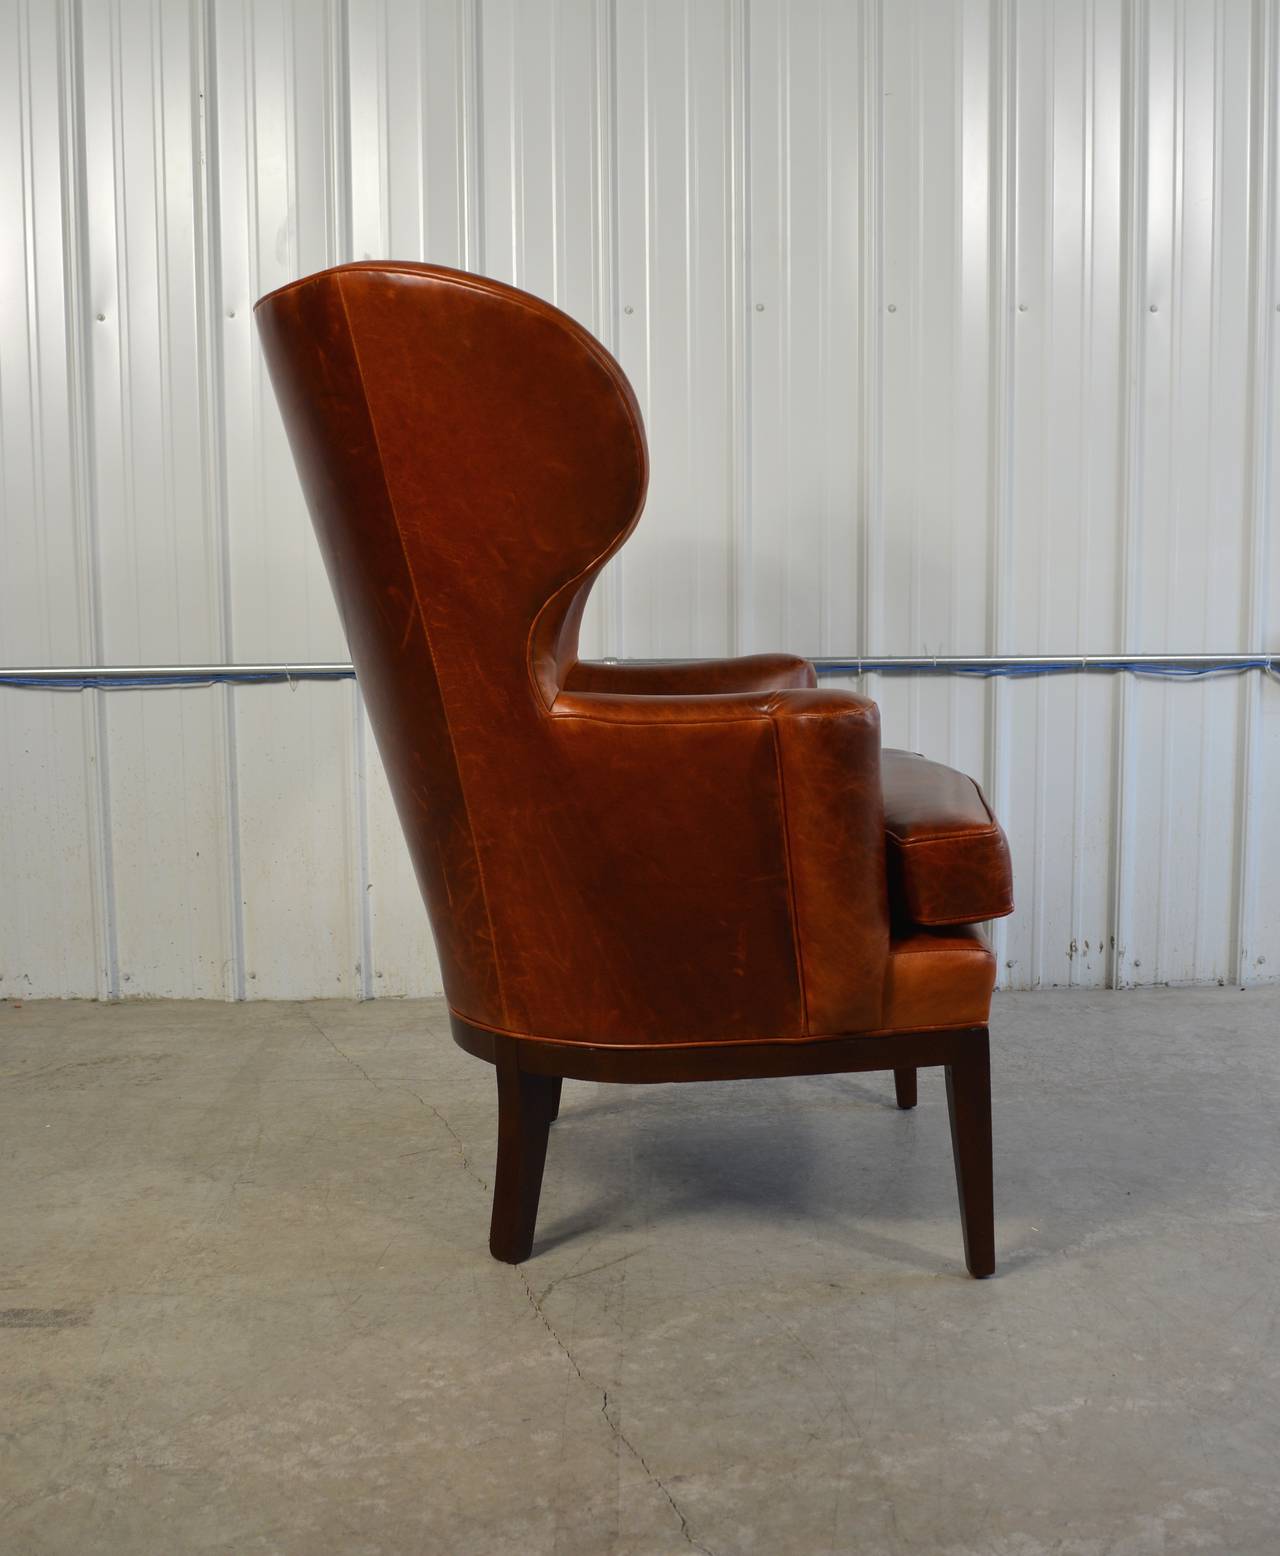 American Early Wingback Leather Lounge Chair by Edward Wormley for Dunbar For Sale